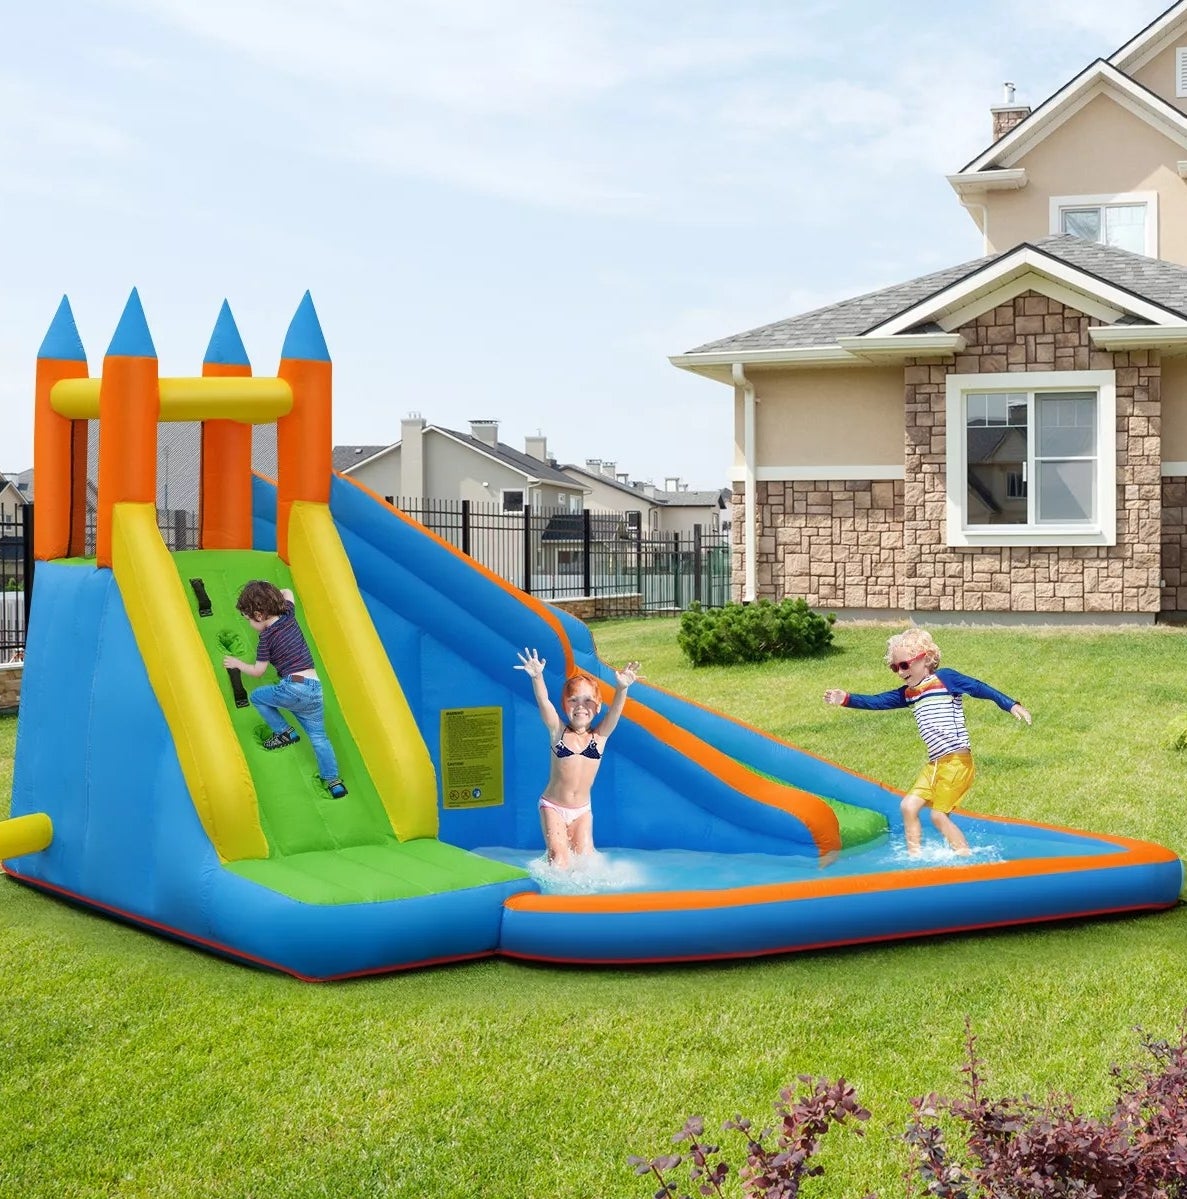 The bounce house water slide